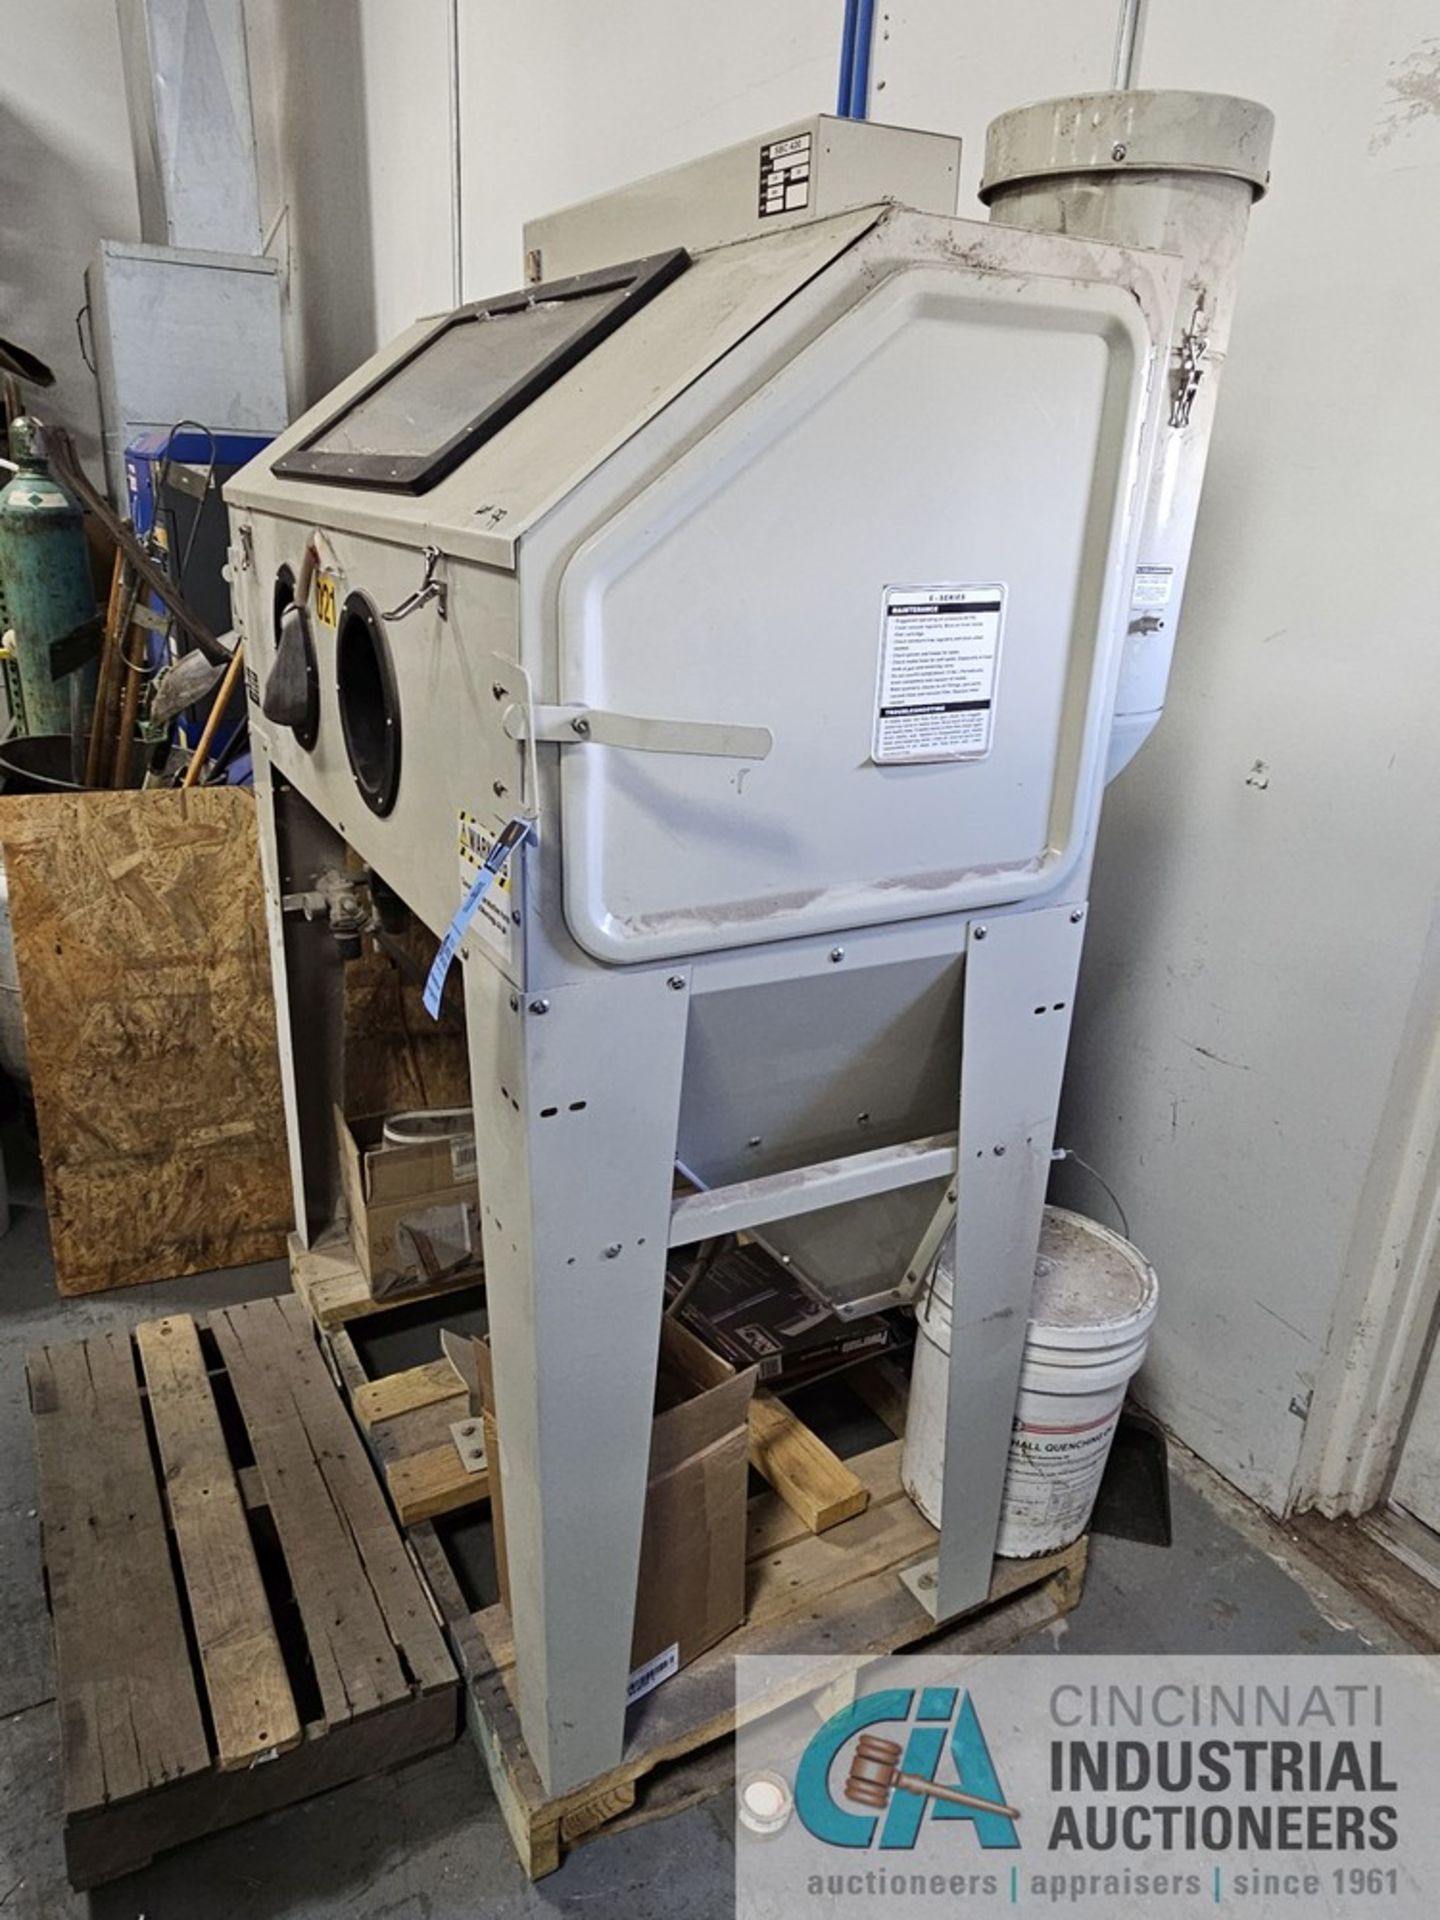 SBC420 ABRASIVE BLAST CABINET, 24" X 48", ATTACHED DUST COLLECTOR - Image 2 of 7